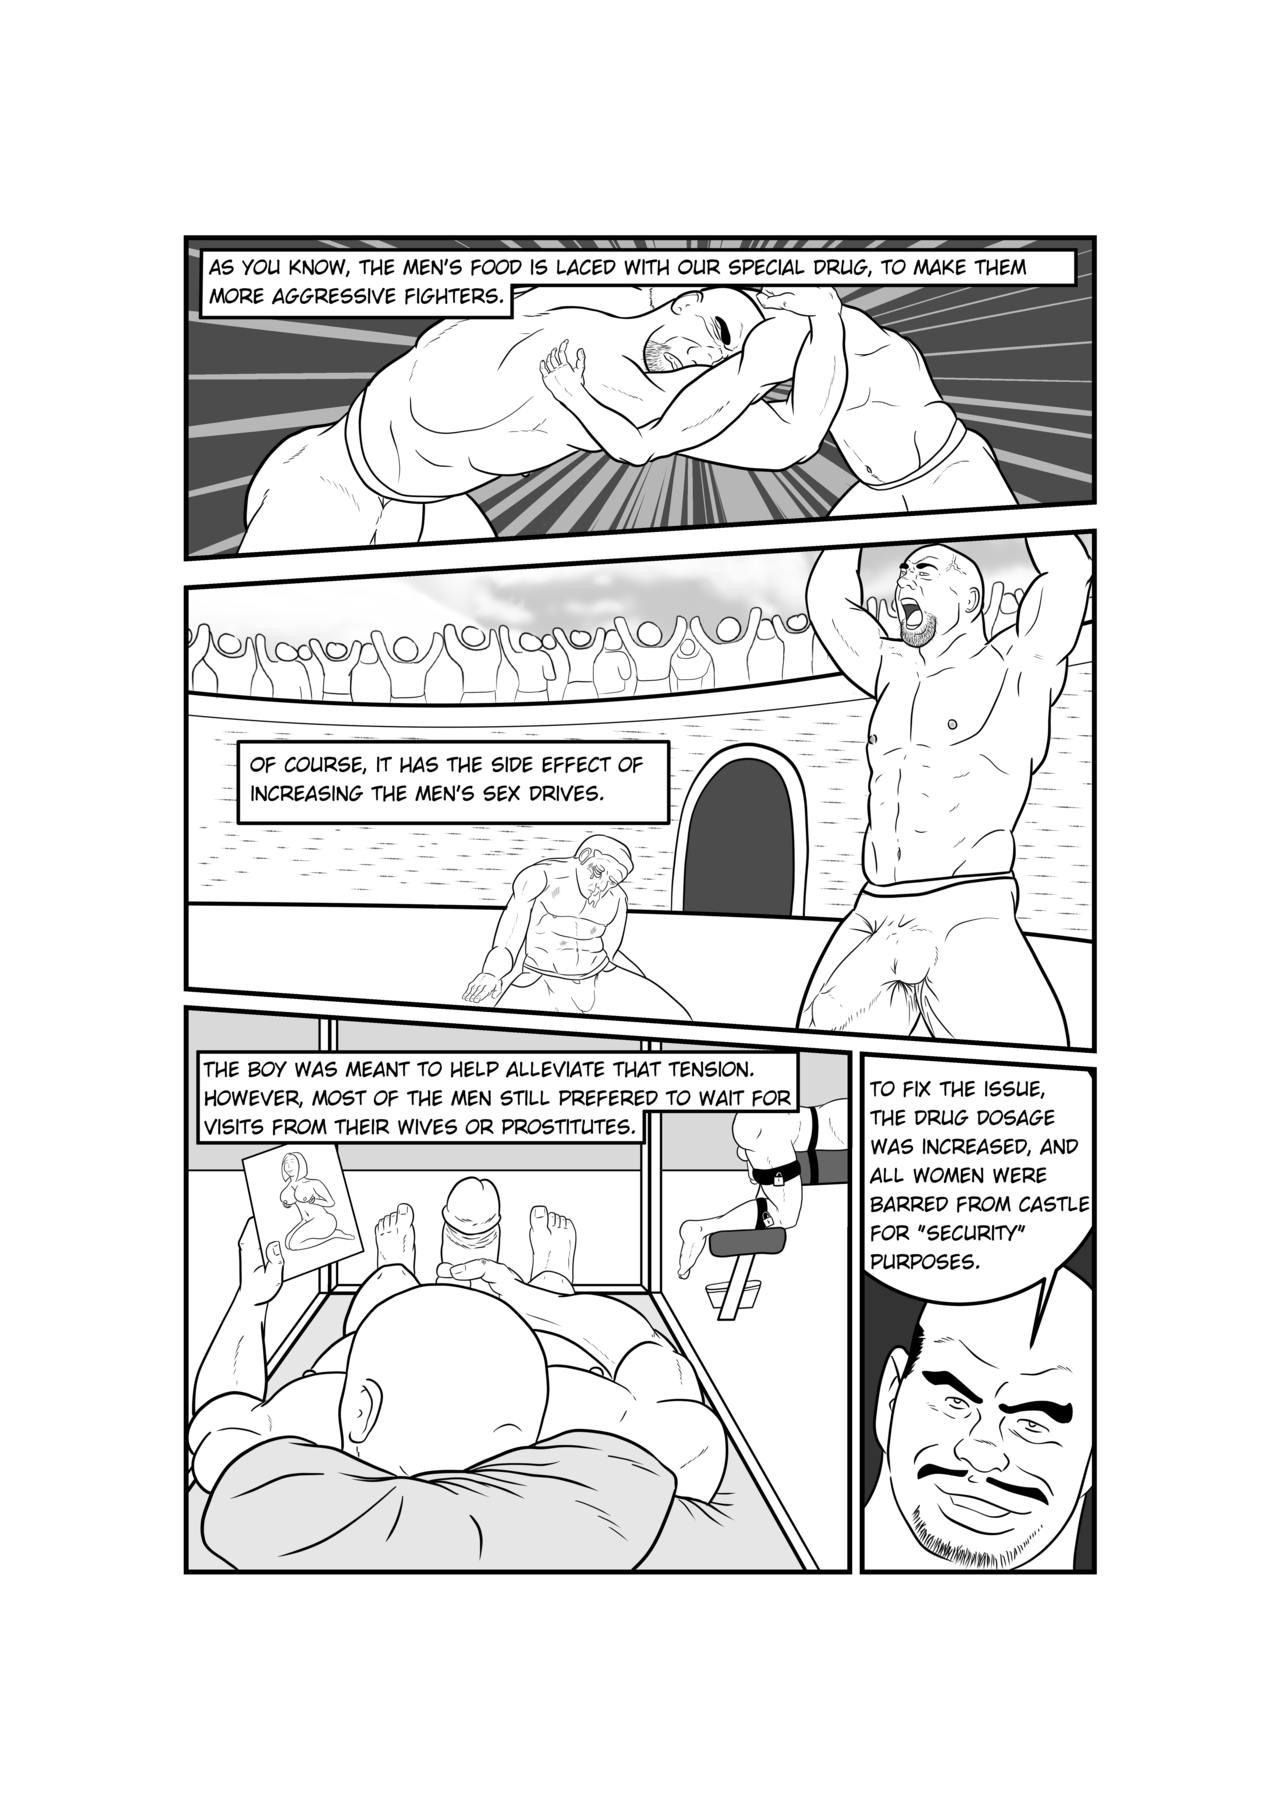 Cogiendo Father and Son in Hell - Unauthorized Fan Comic - Original Exotic - Page 3